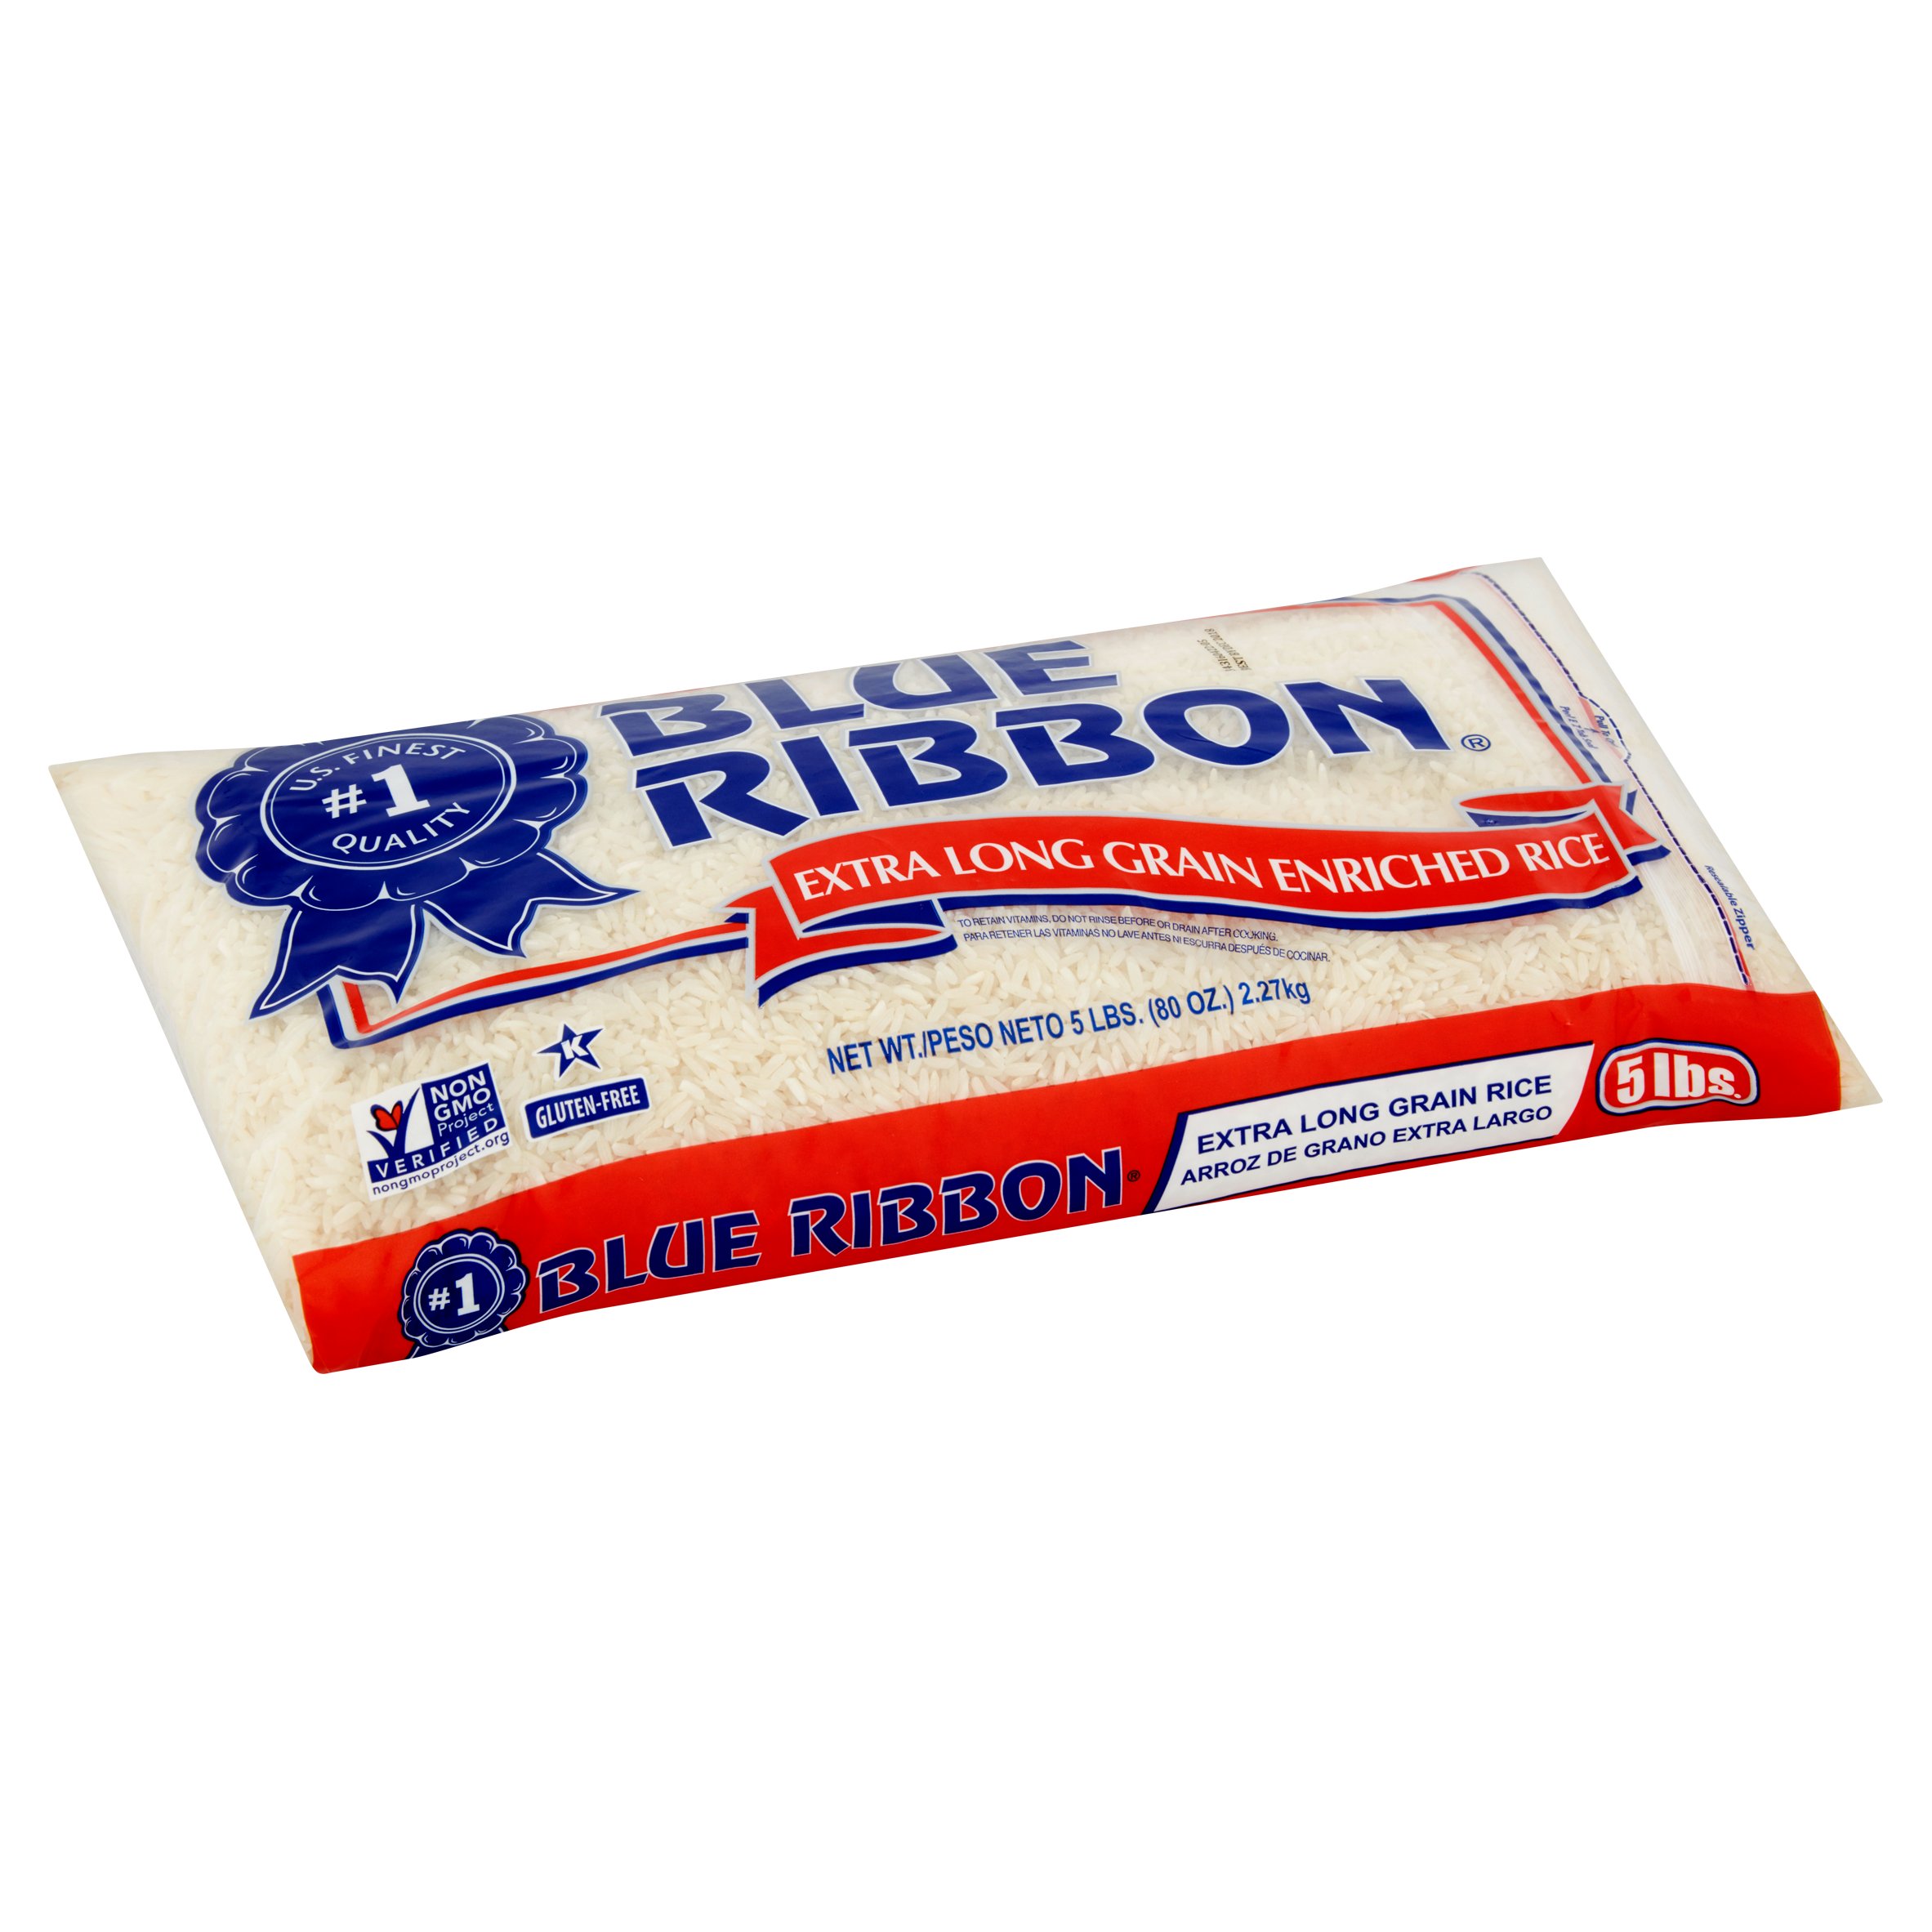 Blue Ribbon White Rice, Extra Long Grain Enriched Rice, 5 lb Bag - image 3 of 5